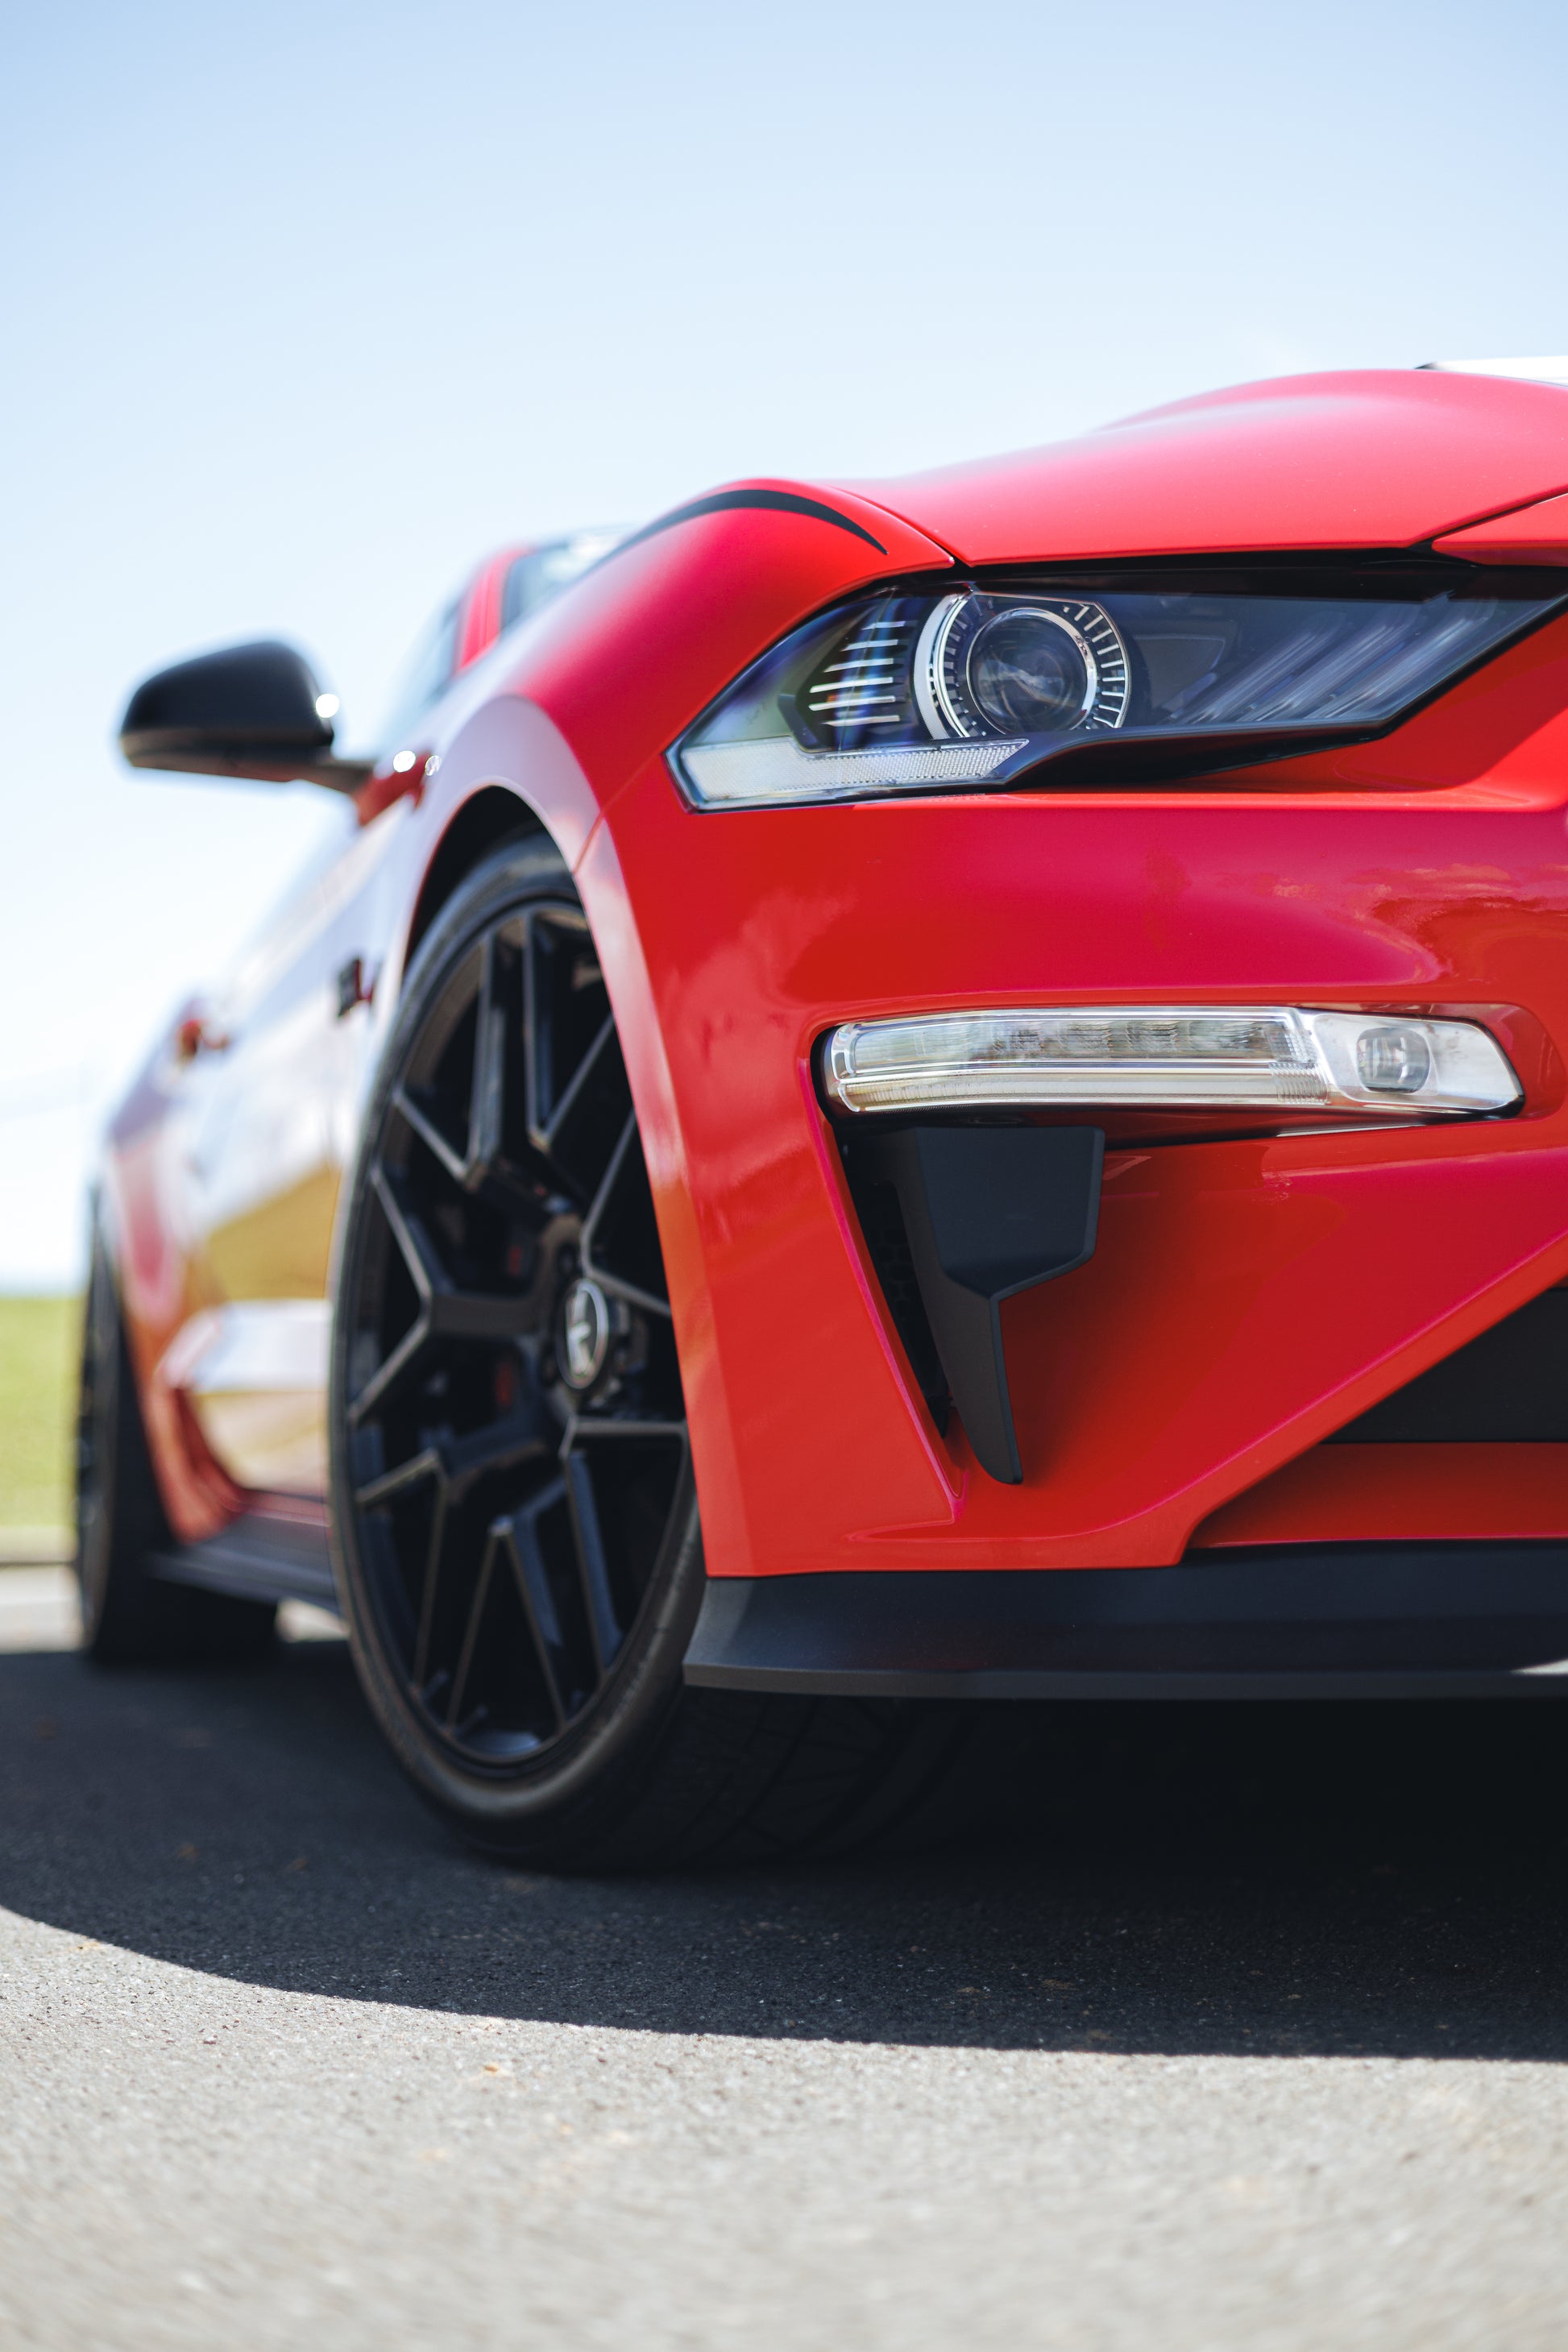 RTR Bumper Vents (18-22 Mustang - GT & EcoBoost)